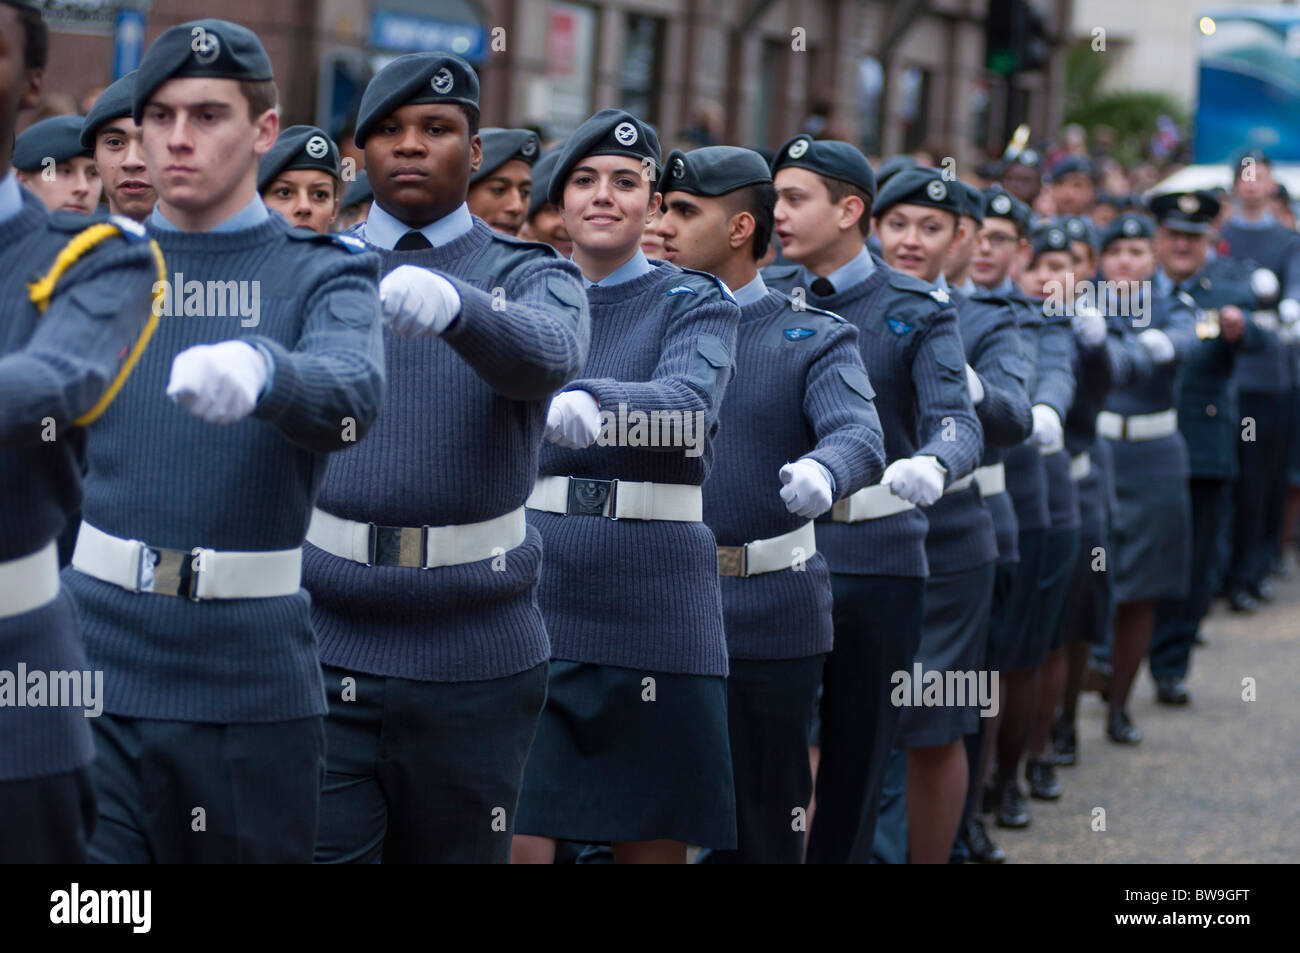 RAF personnel marching at the Lord Mayor's show in London, UK. 2010 ...